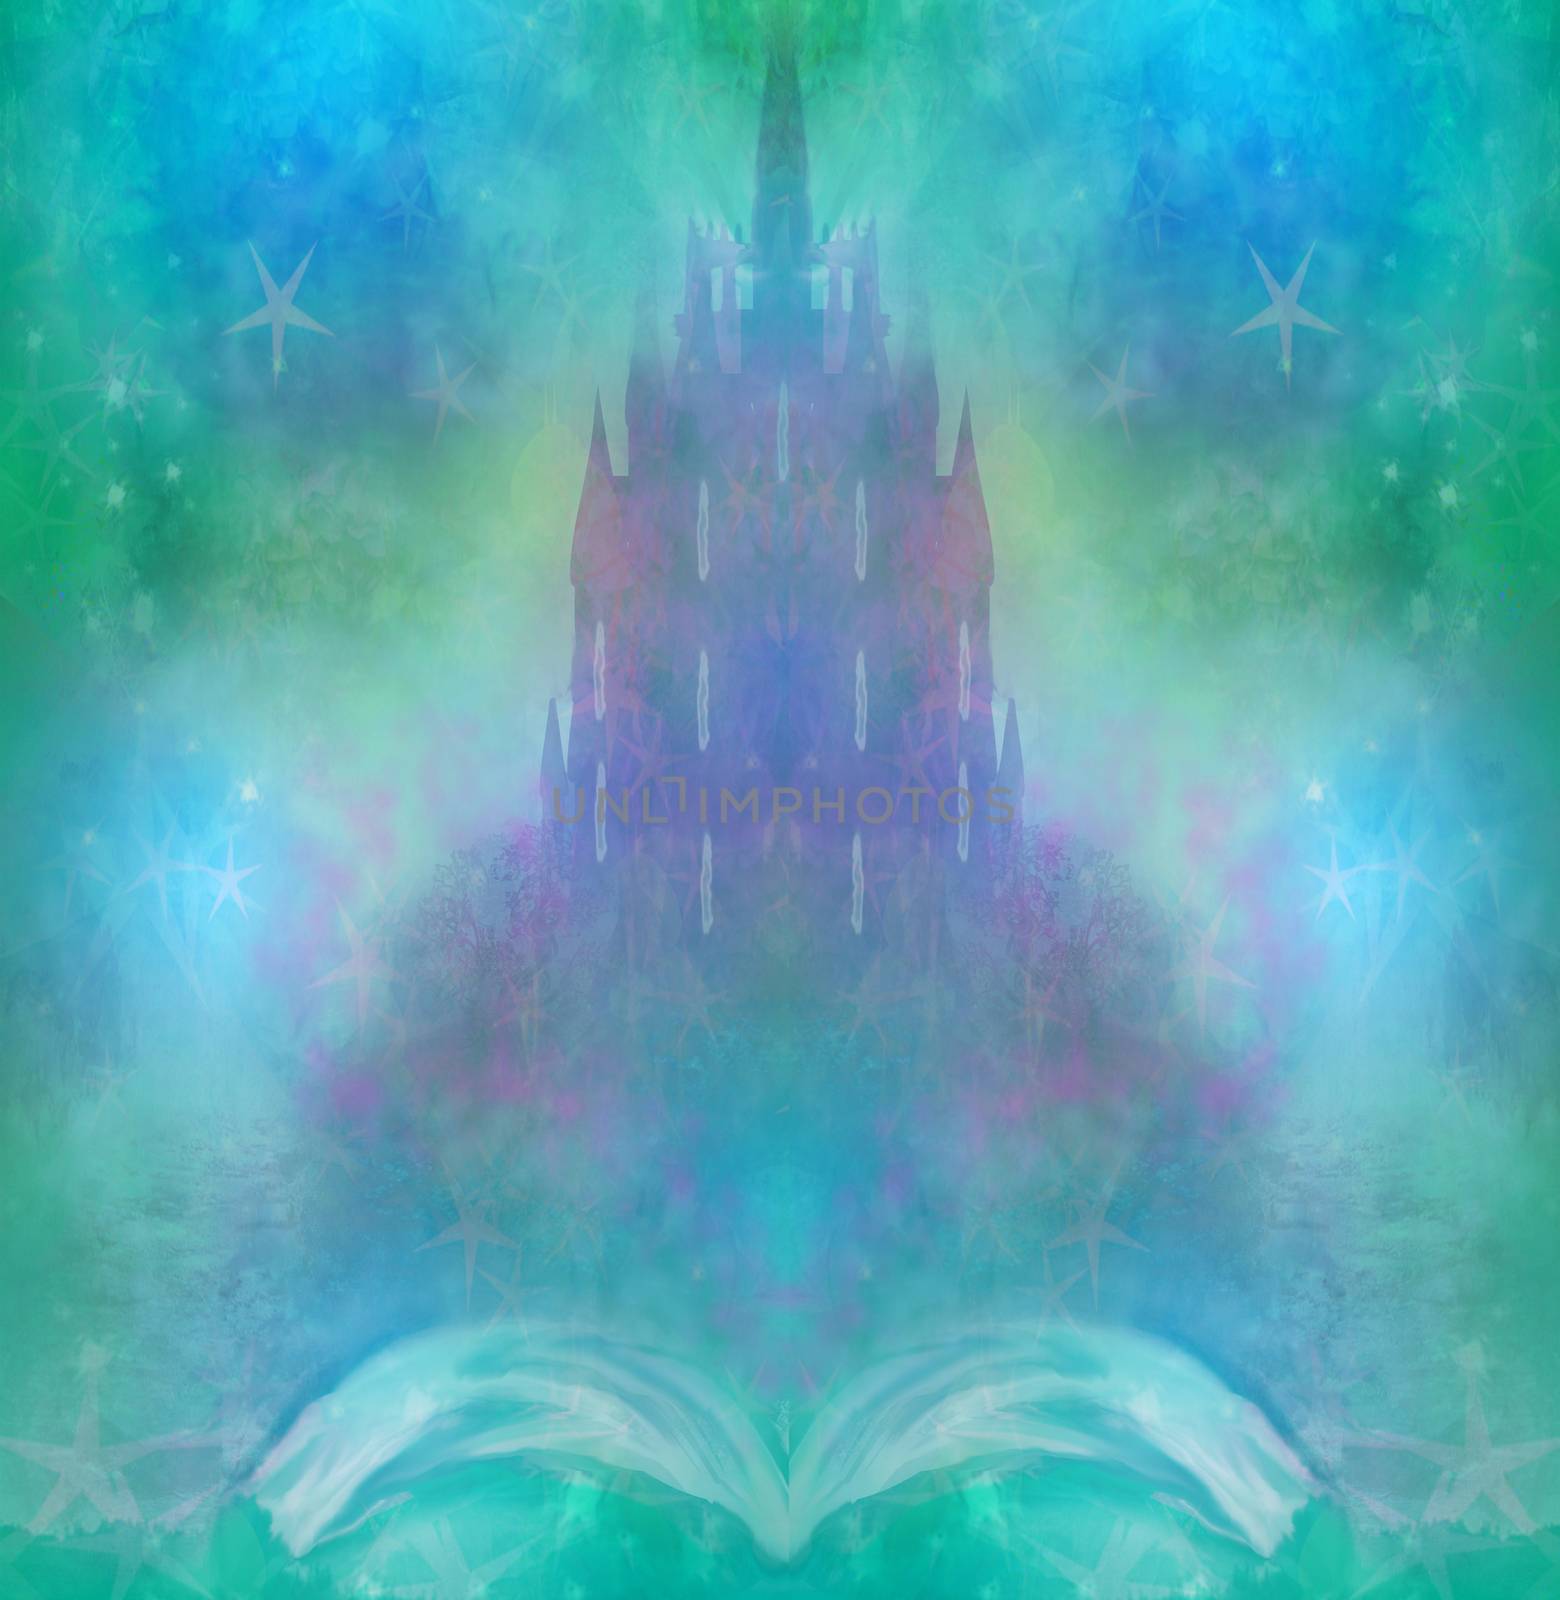 Magic world of tales, fairy castle appearing from the book